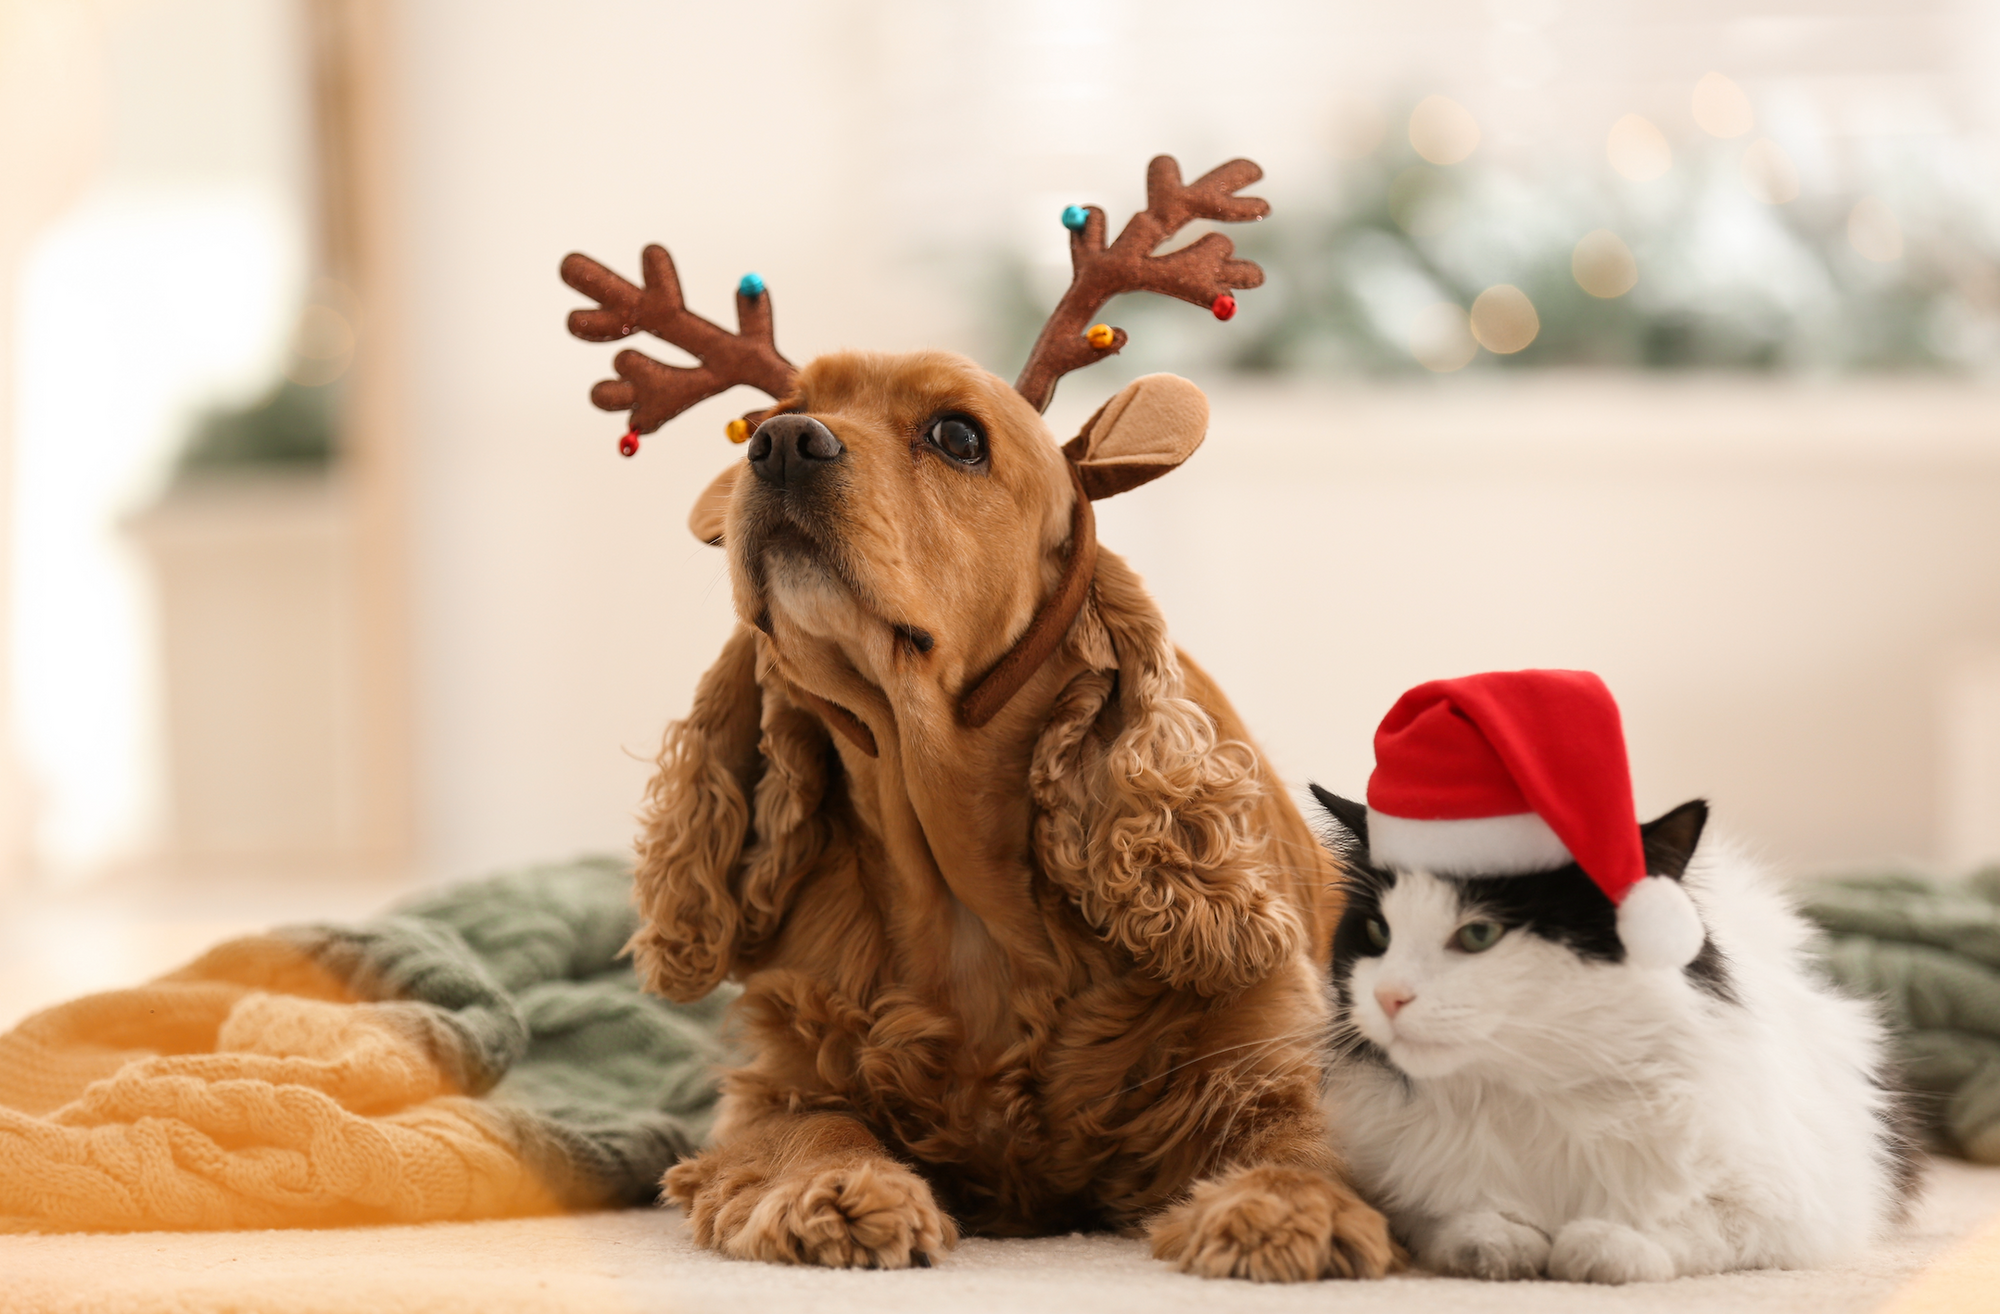 Pet-Approved Stocking Stuffer Ideas for Your Cat or Dog